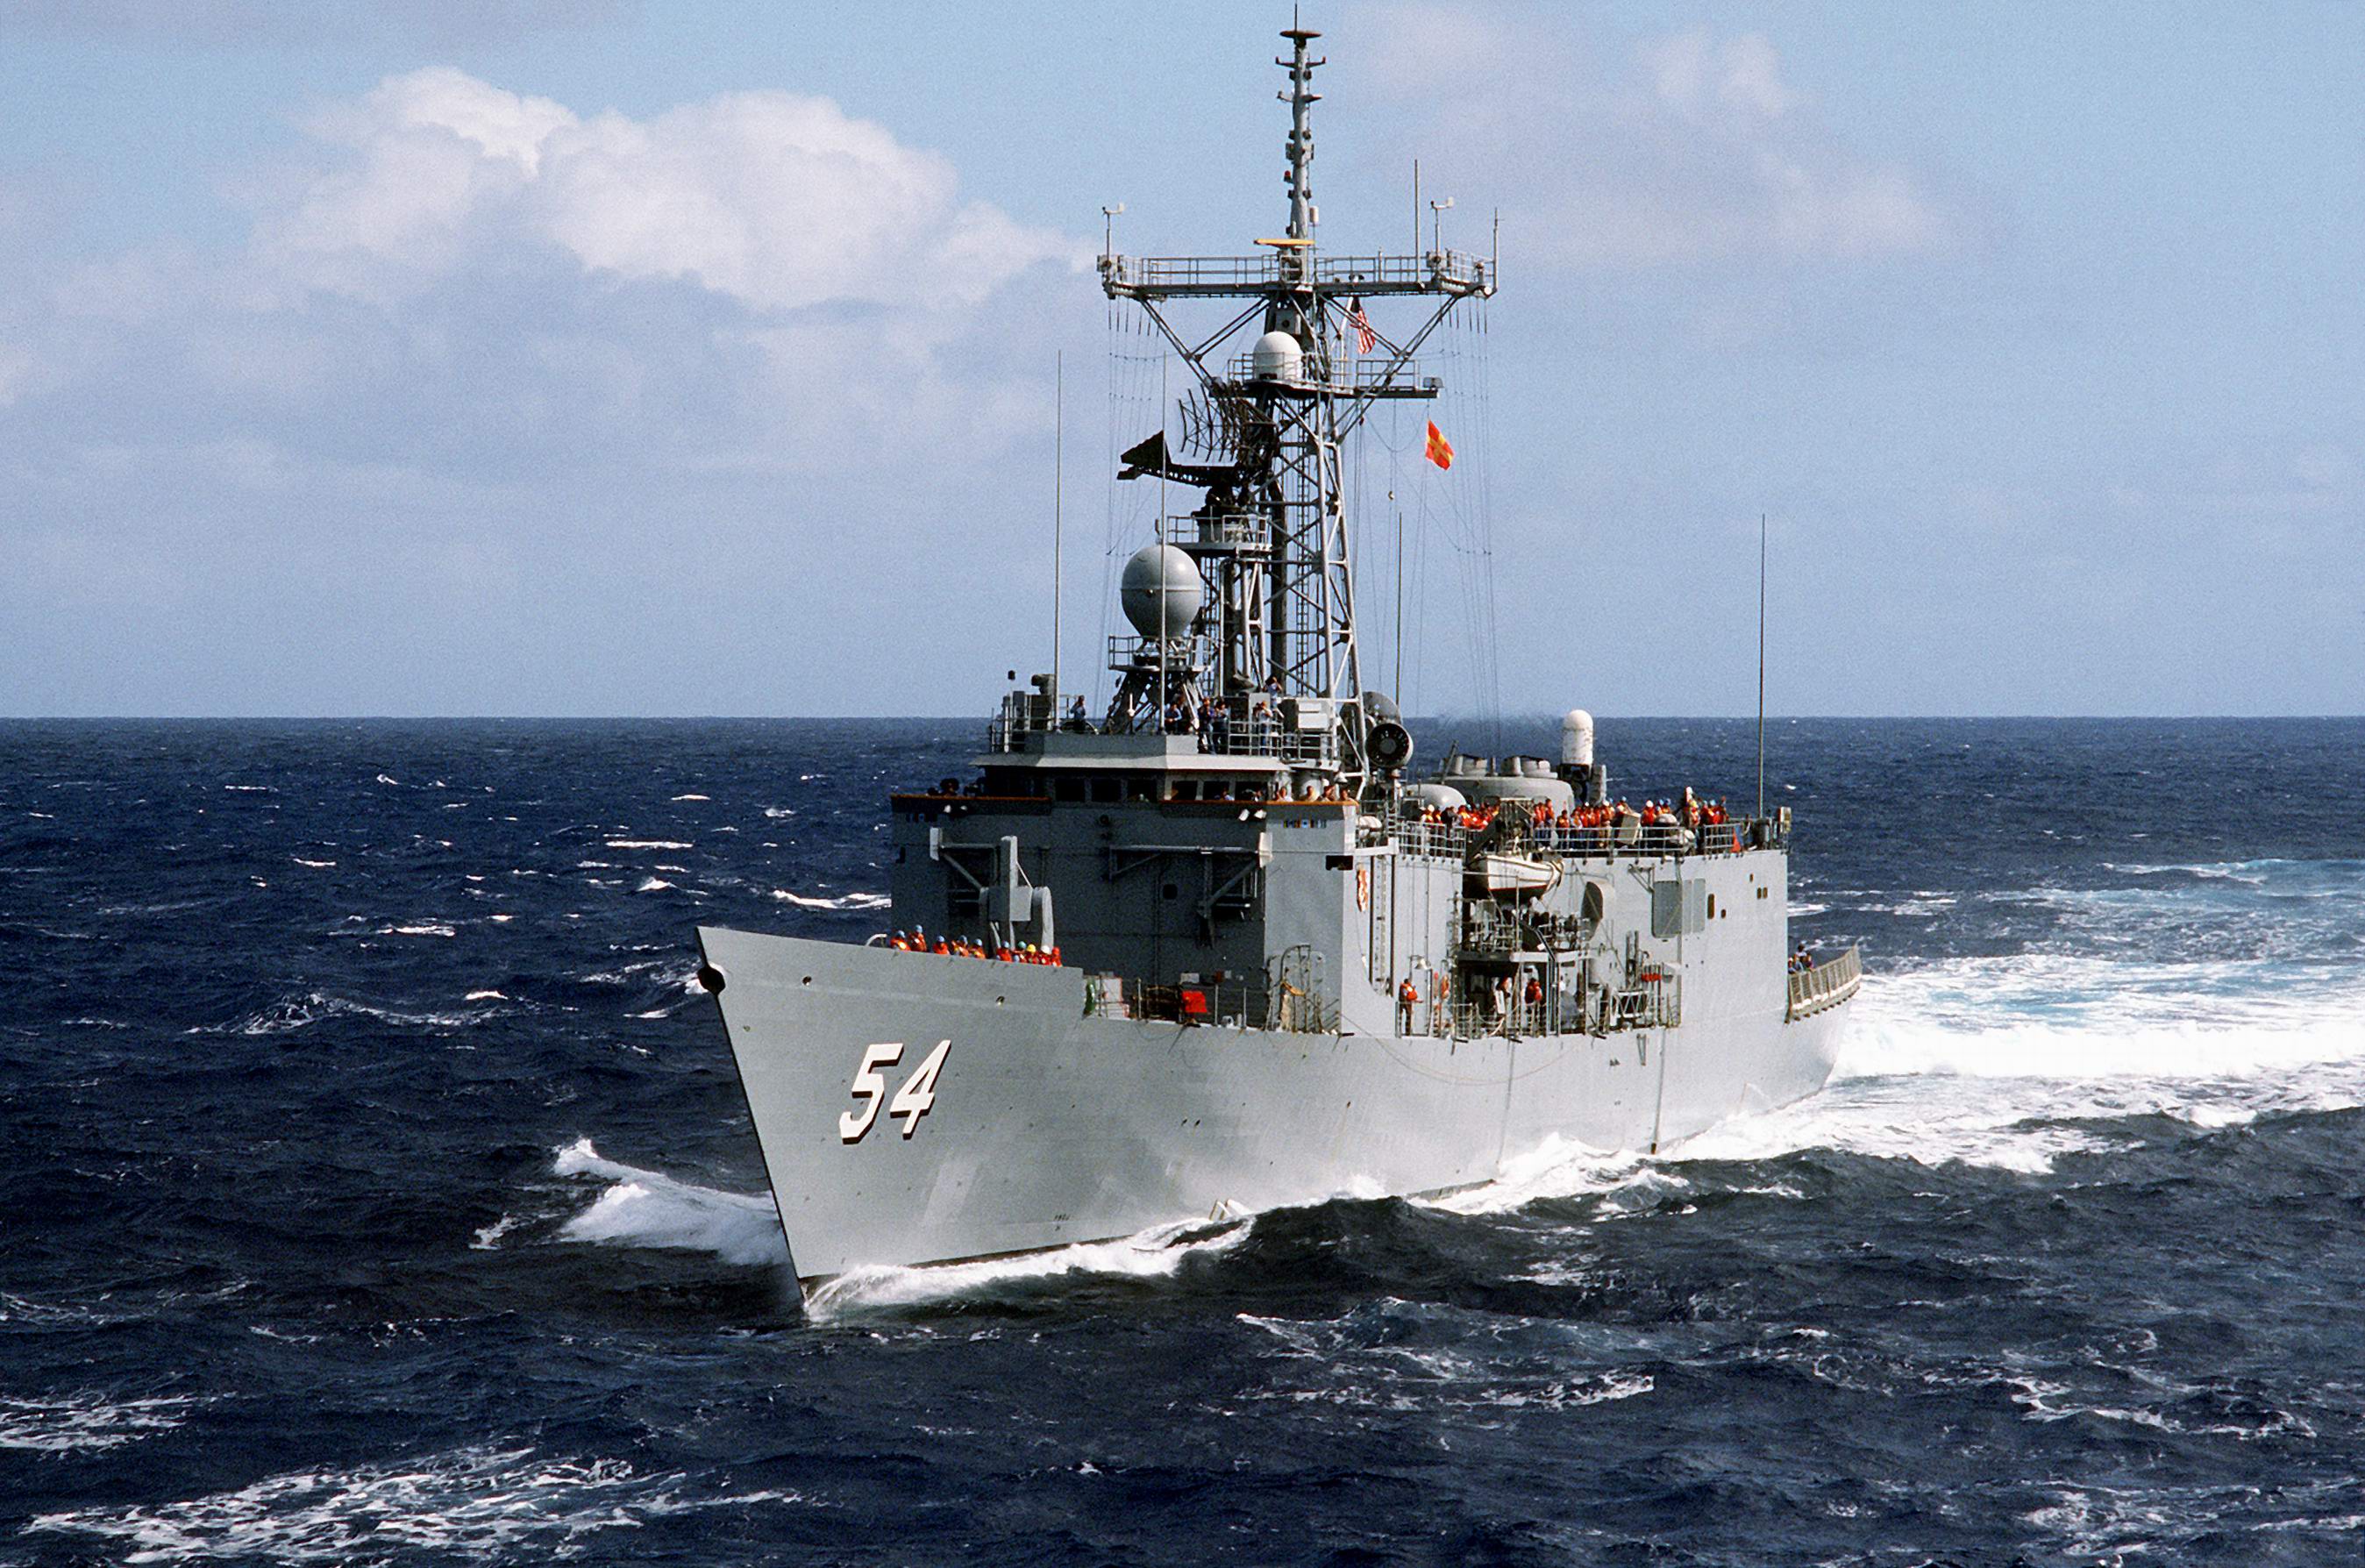 USS FORD (FFG-54) on patrol to safeguard shipping during the war between Iran and Iraq - 1 Oct 1987 - Photo by PH1 T.Cosgrove.jpg